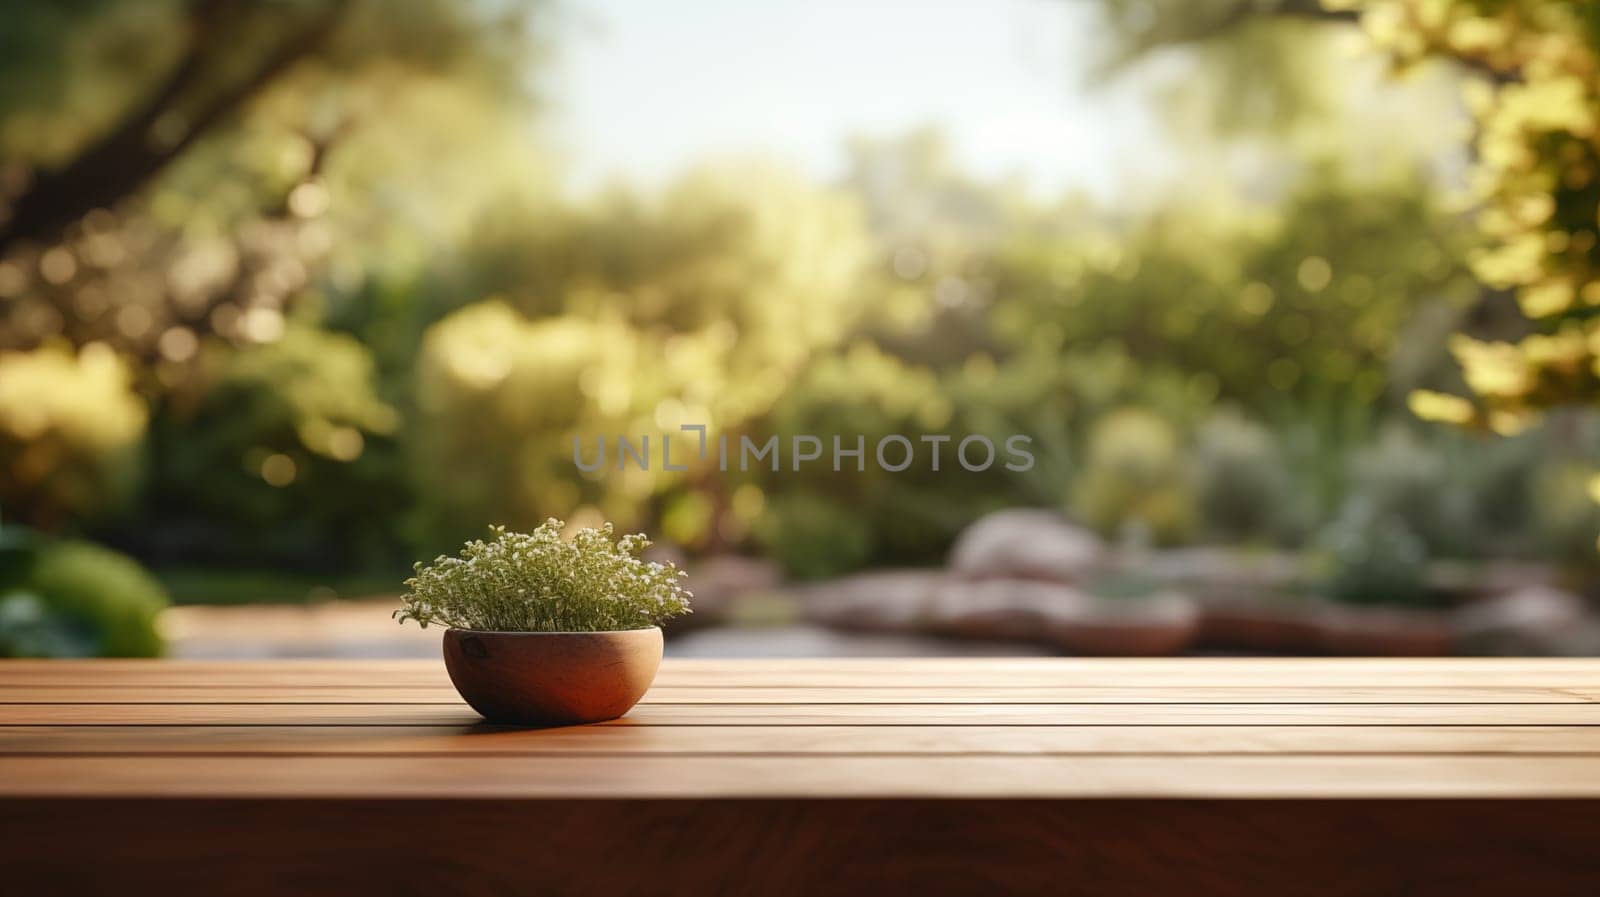 Peaceful garden scene with warm sunlit foliage and green plant on wooden table. Place for your product